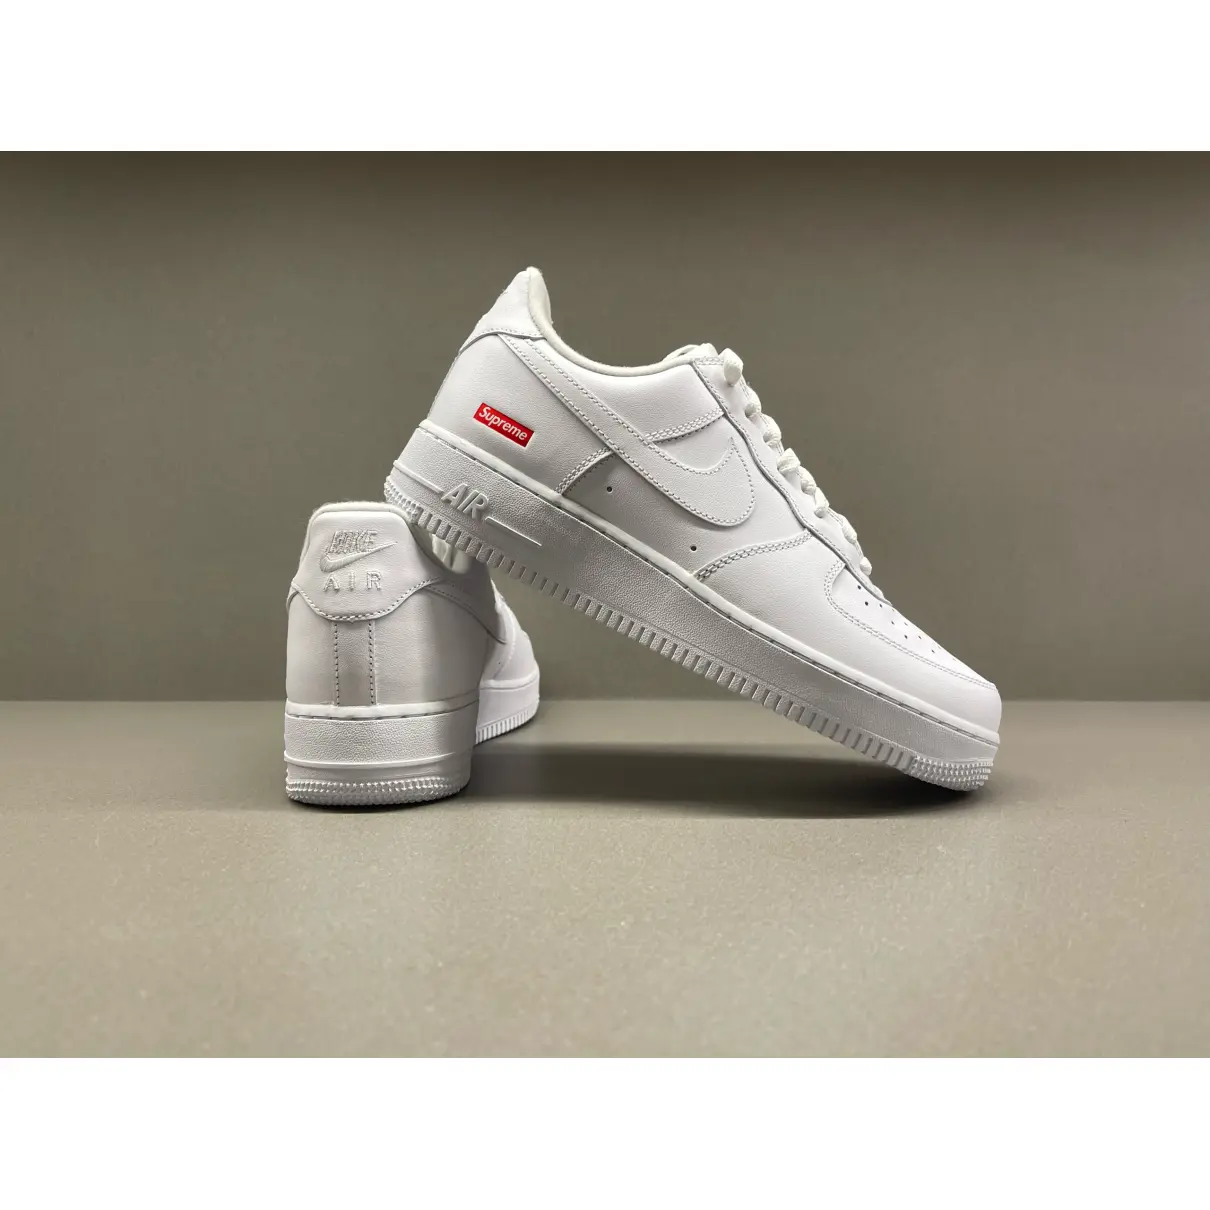 Air Force 1 leather low trainers Nike x Supreme